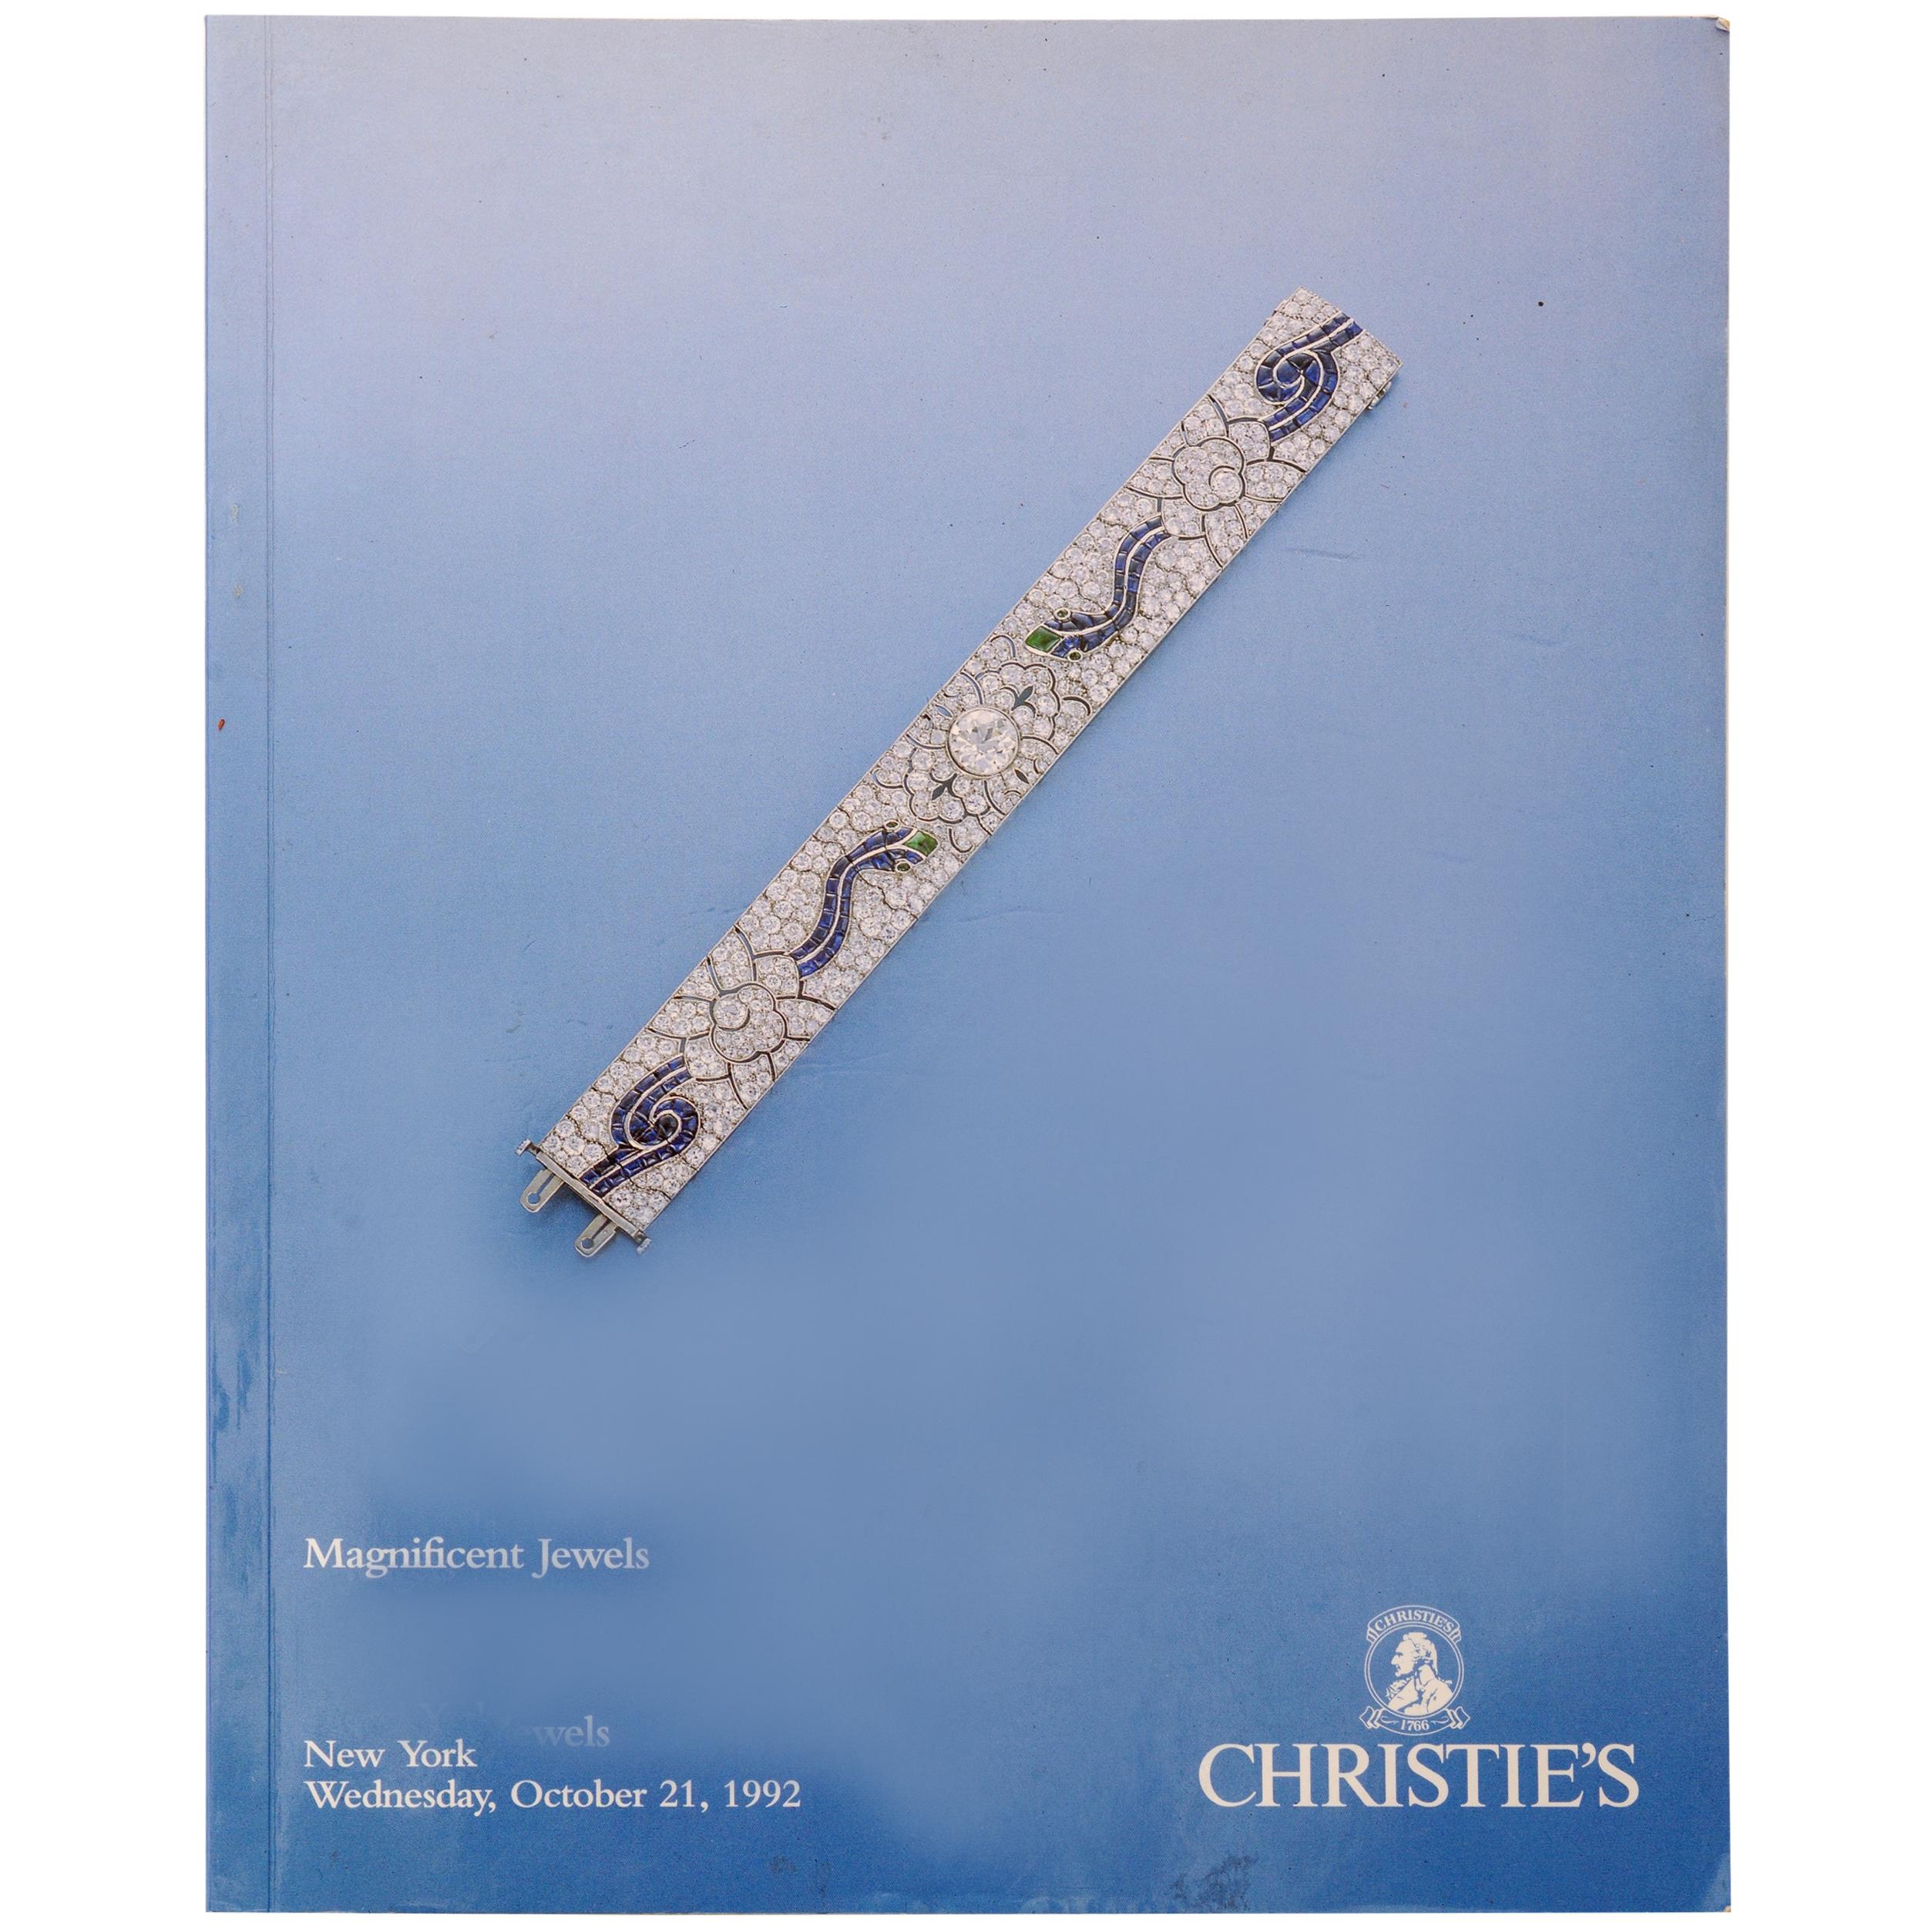 Christie's Auction New York Magnificent Jewels October 21, 1992